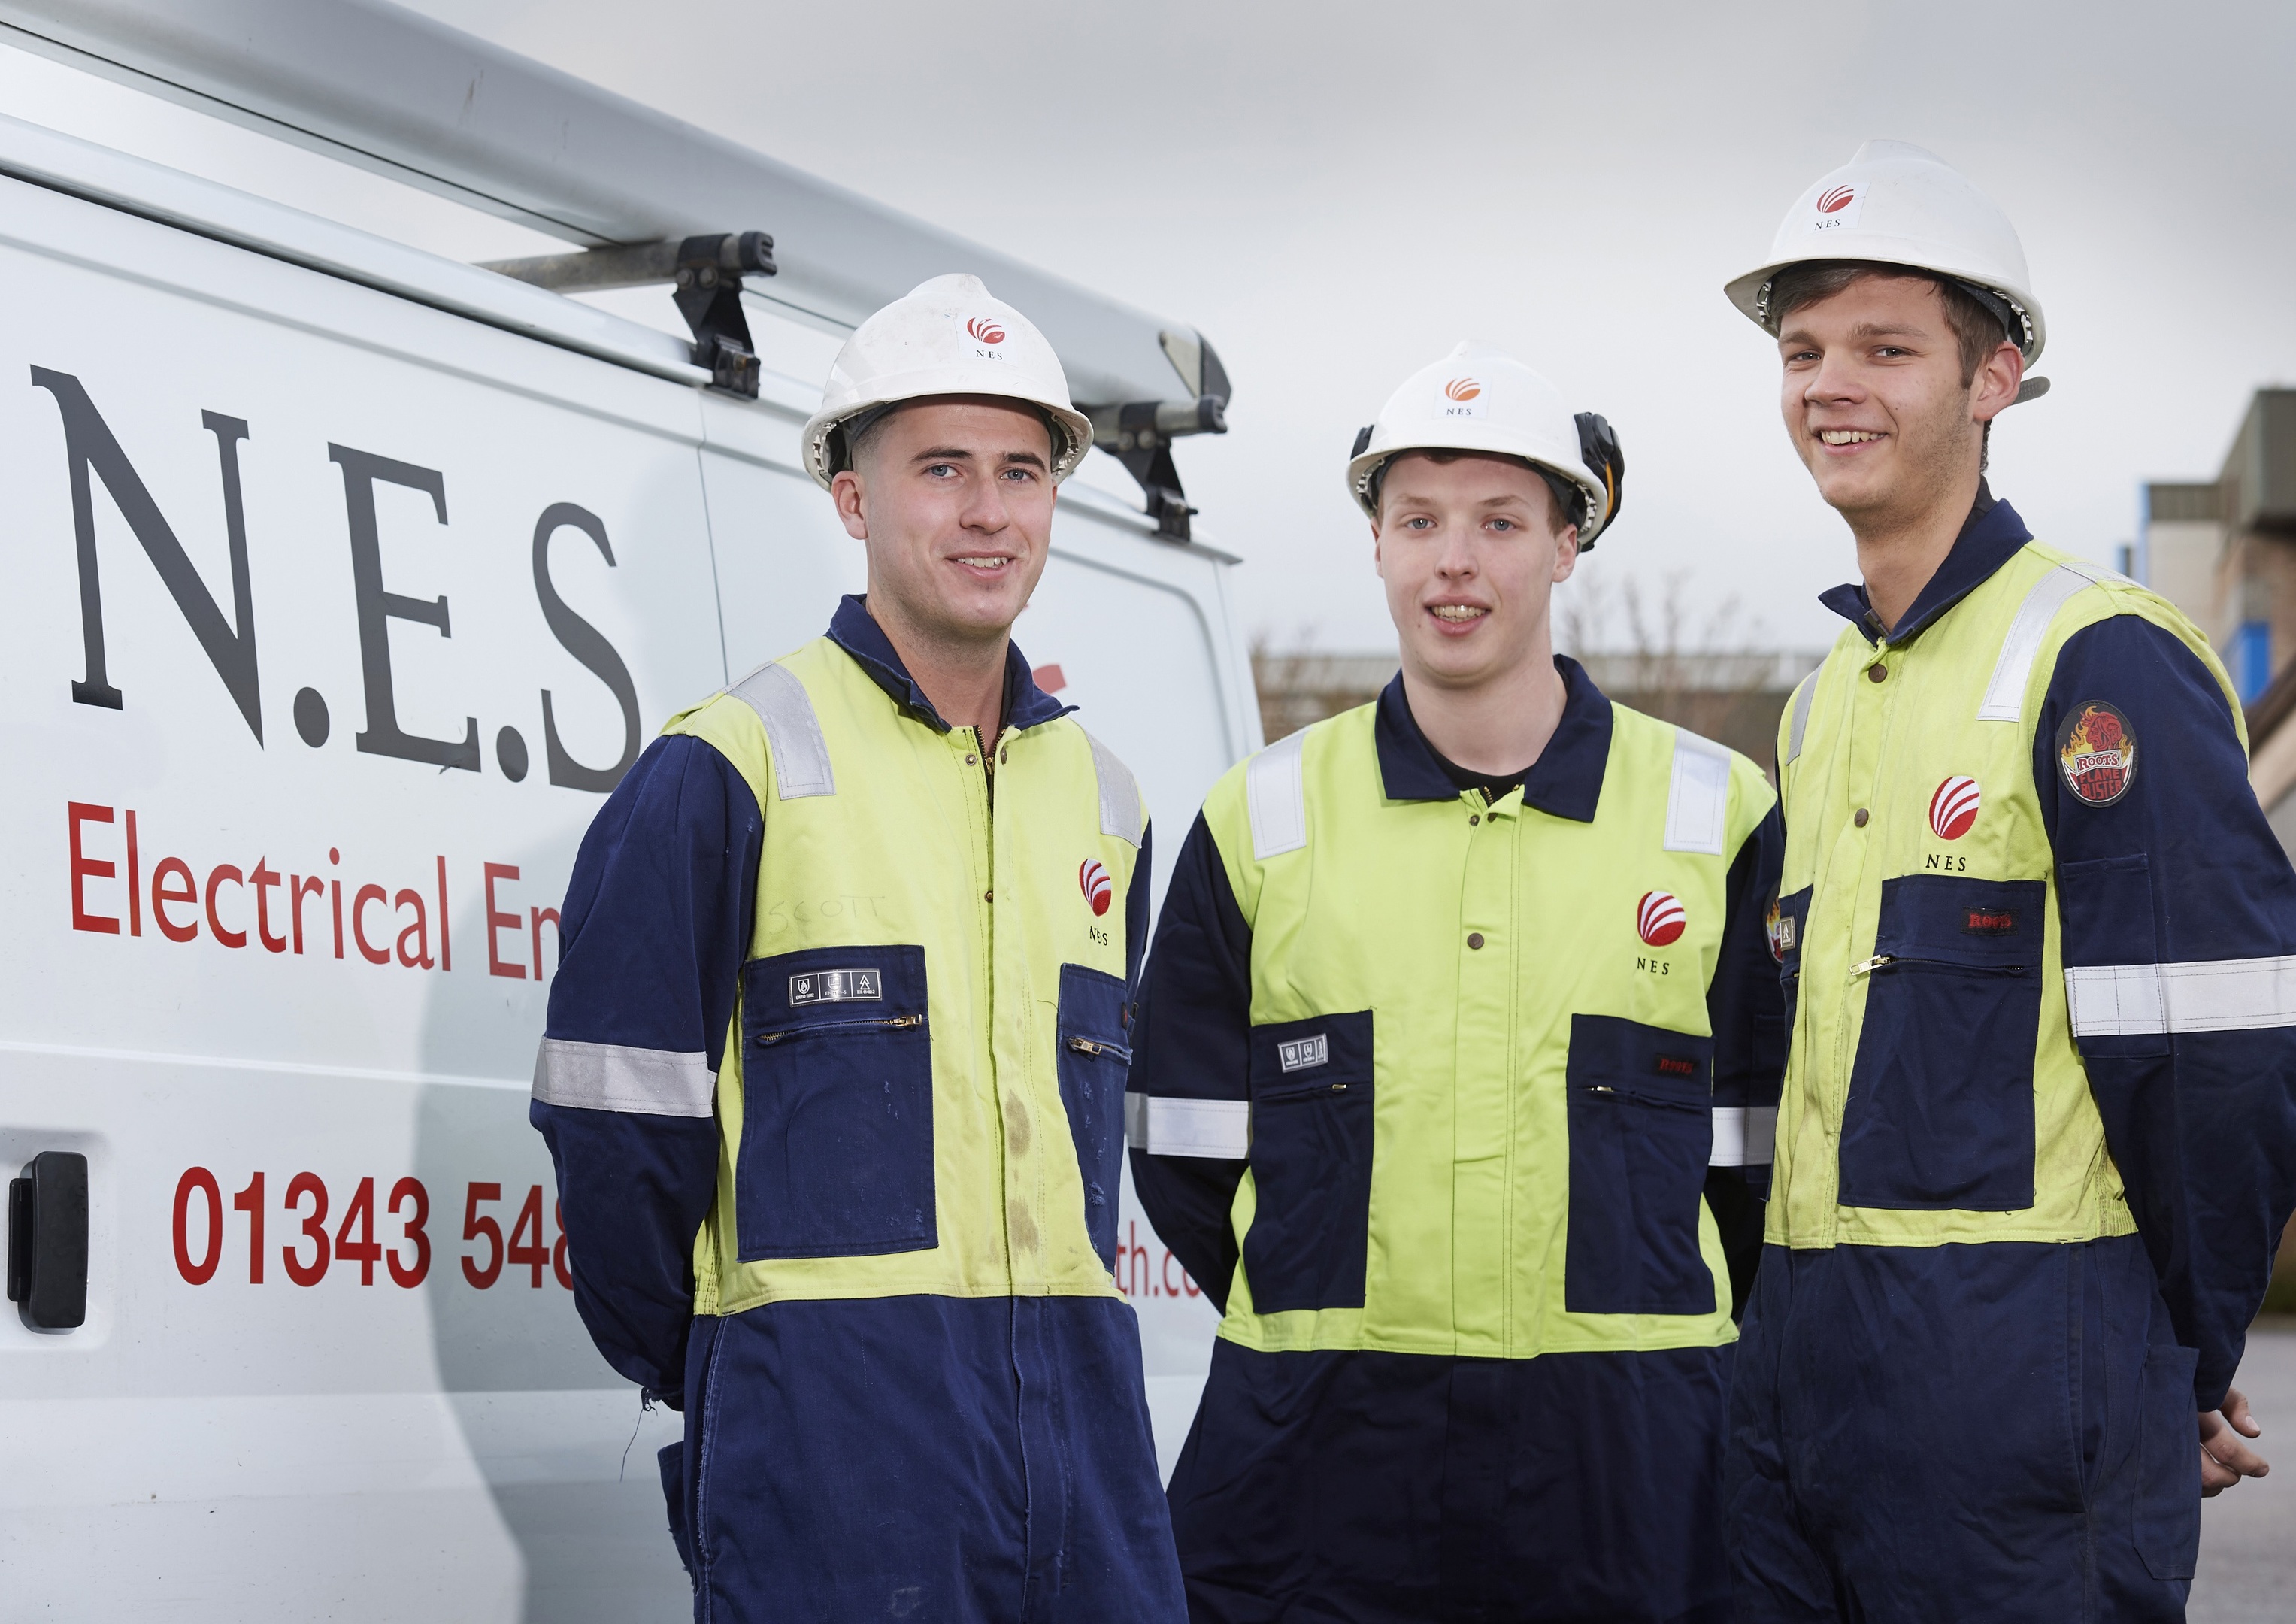 NES electrician Scott Mathieson with apprentices Lewis Bates and Craig Mone.